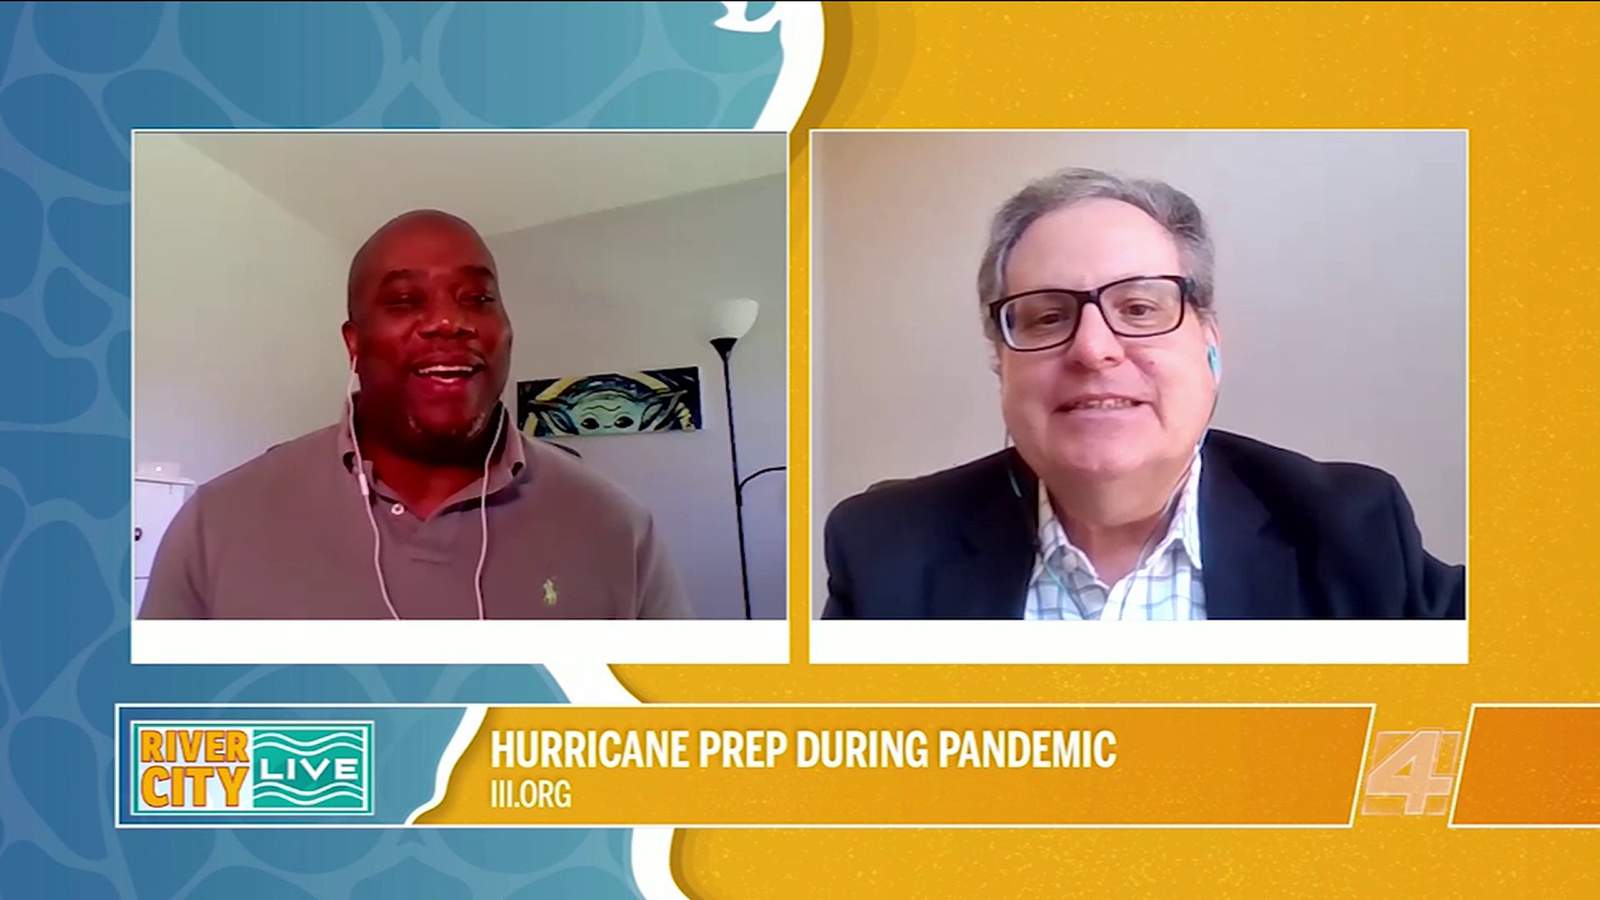 Hurricane Prep During the Pandemic | River City Live